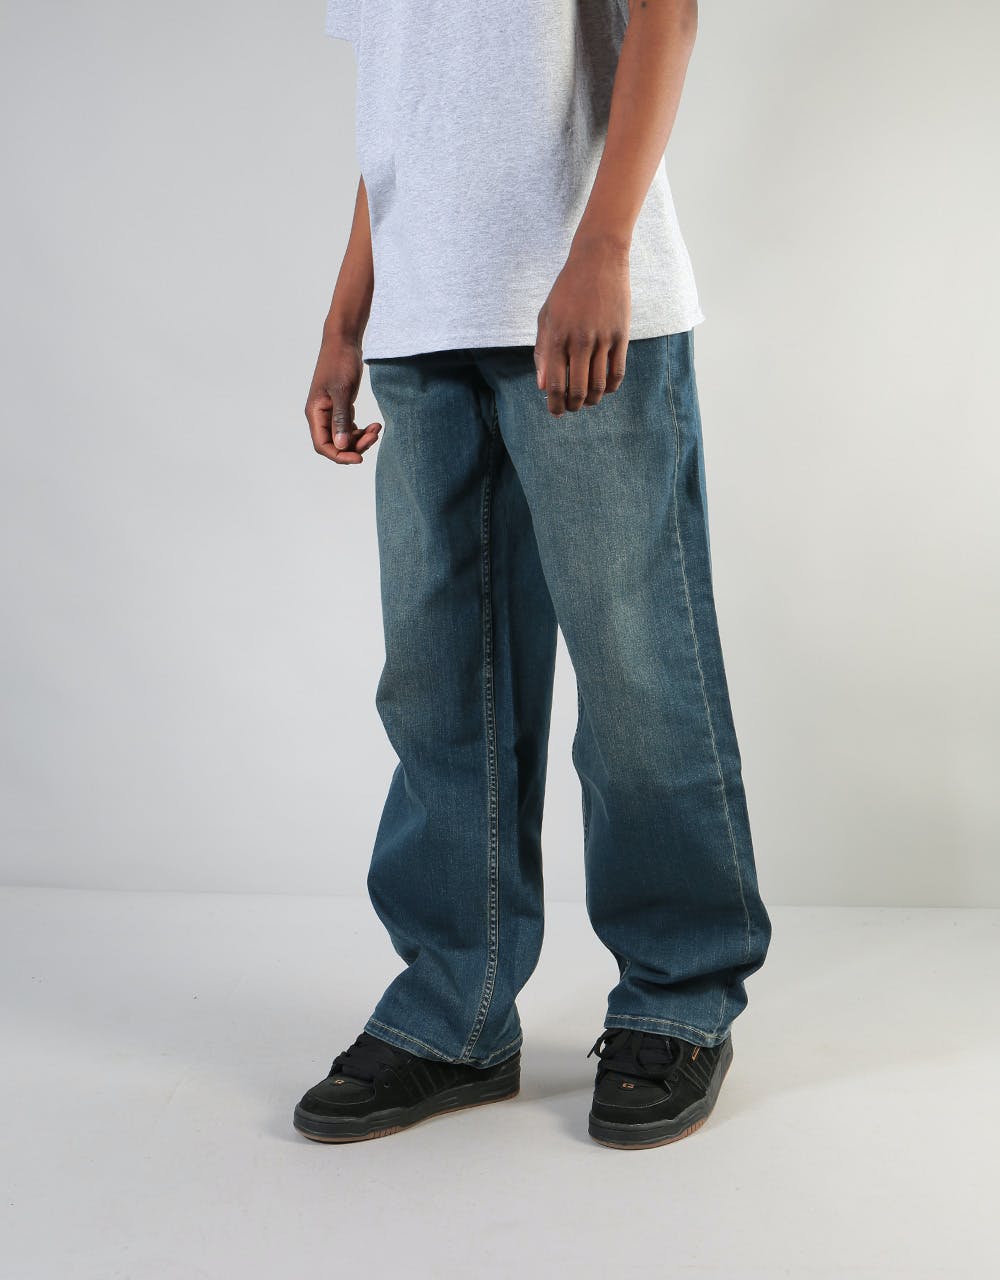 Baggy-Clothing. Top 10 Outdated Fashion and Clothing Trends to Avoid in 2021